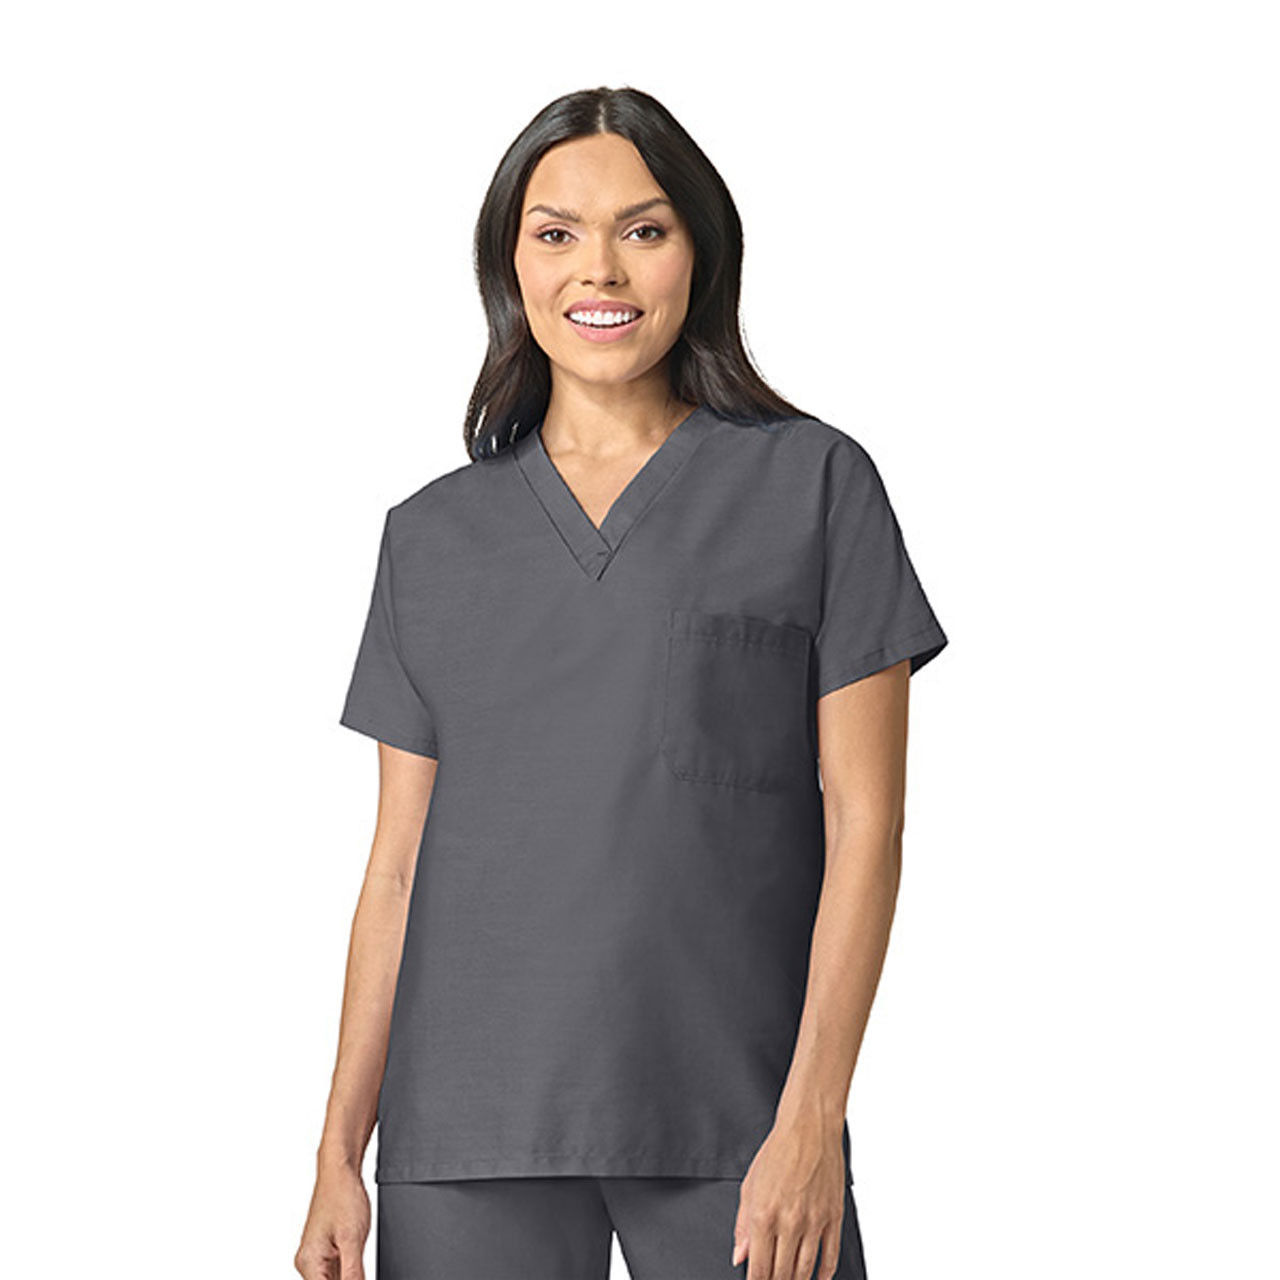 What type of sleeves does the Pewter Gray Scrub Top have?